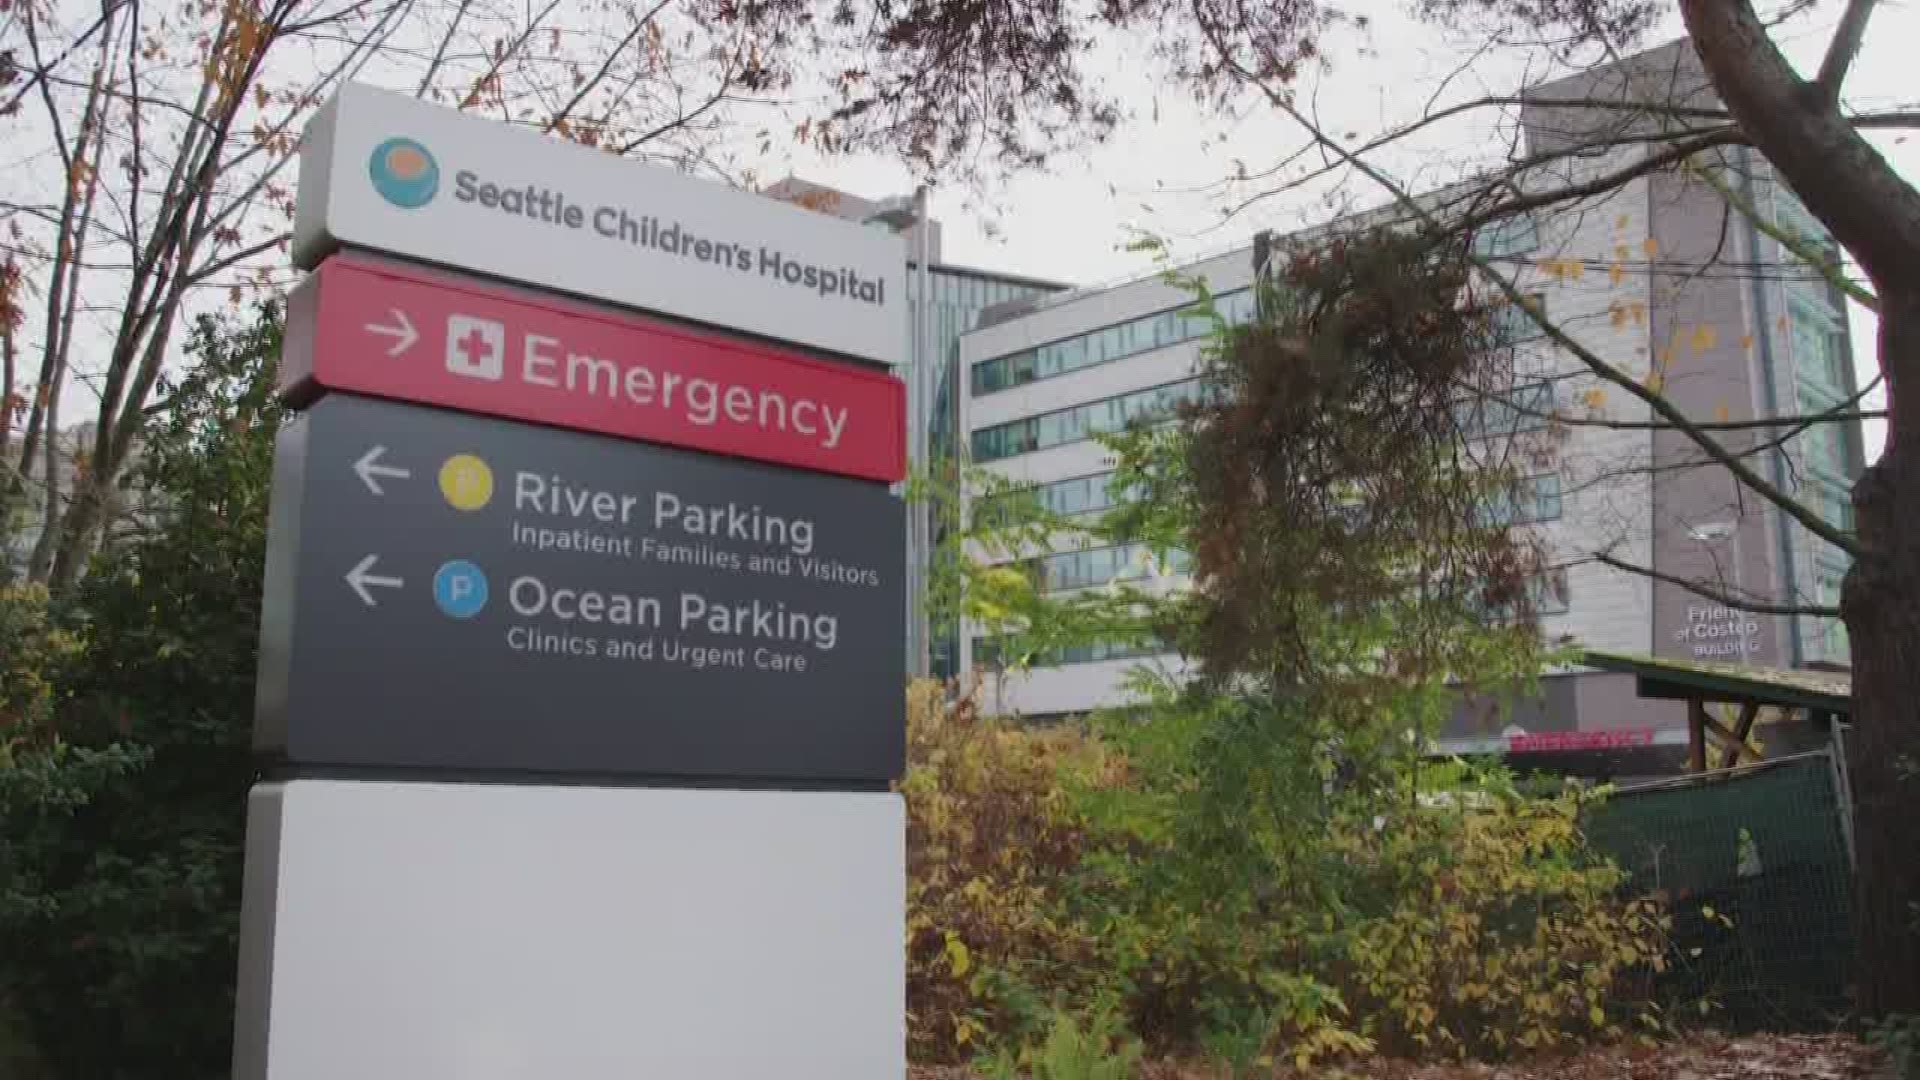 One of the key documents that have been released is the "final report" from a CDC team that visited the hospital for two days in July 2019.